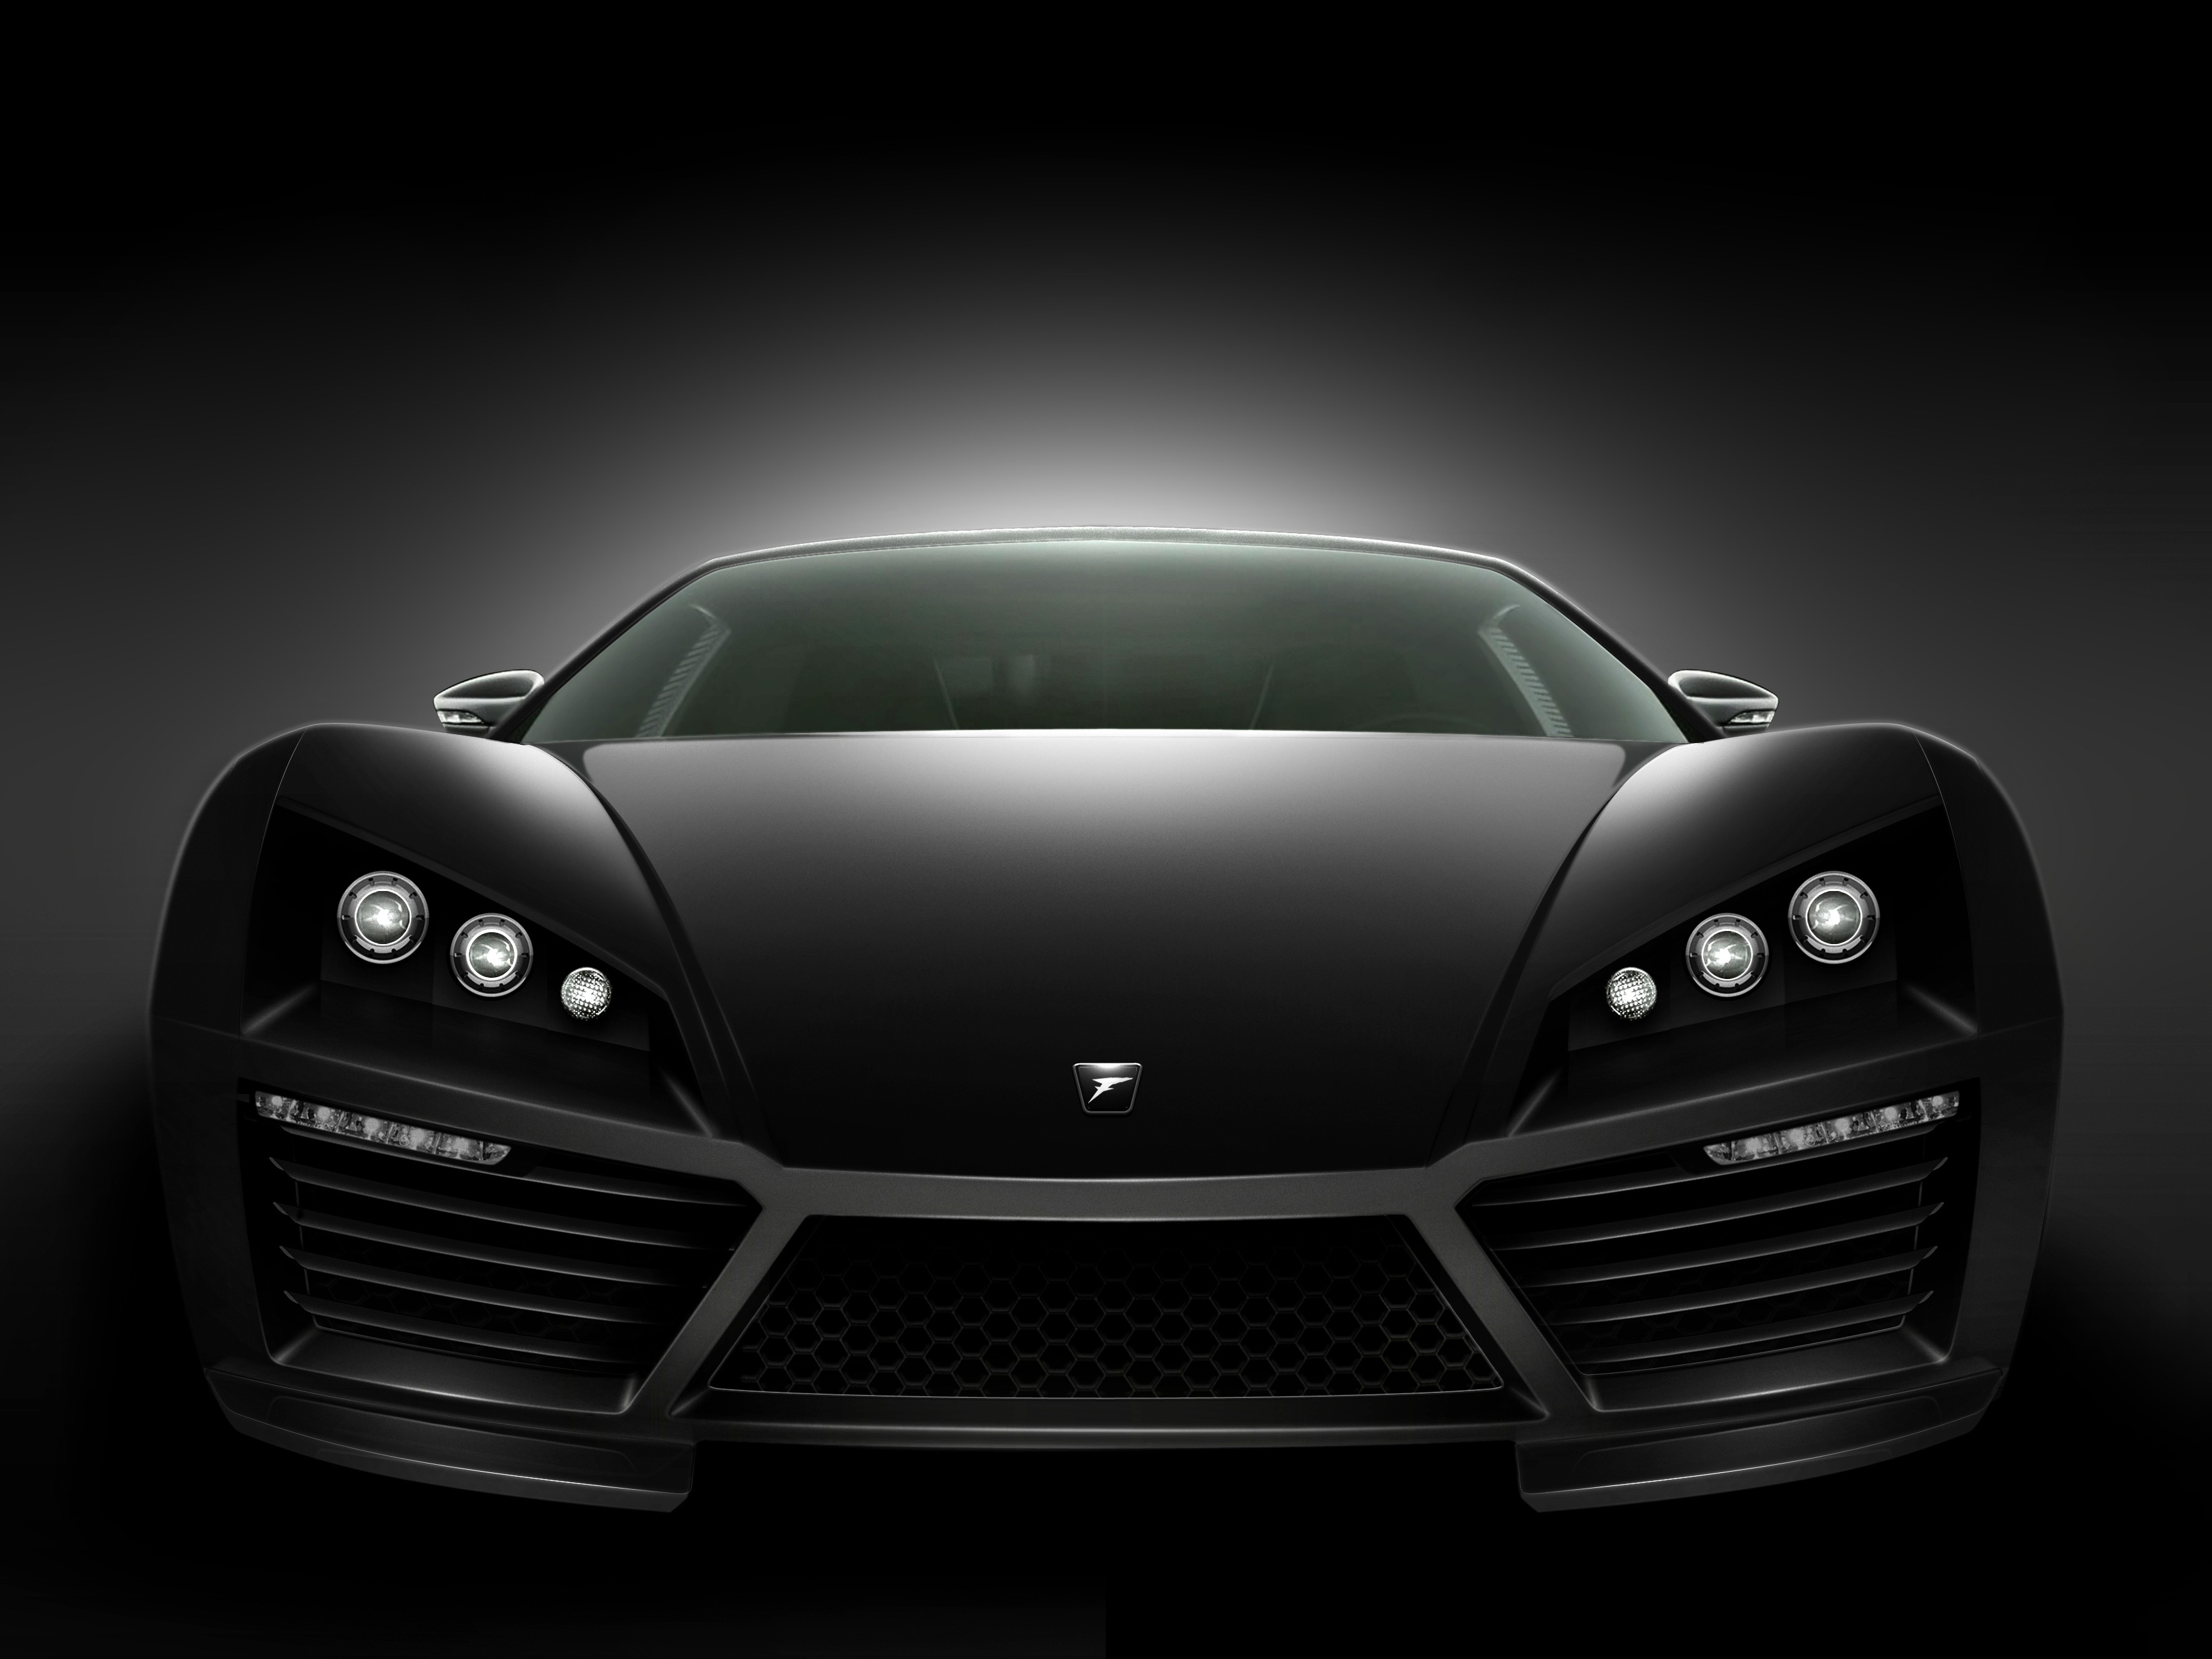 General 3543x2657 car black cars vehicle Fenix V8 frontal view simple background British cars